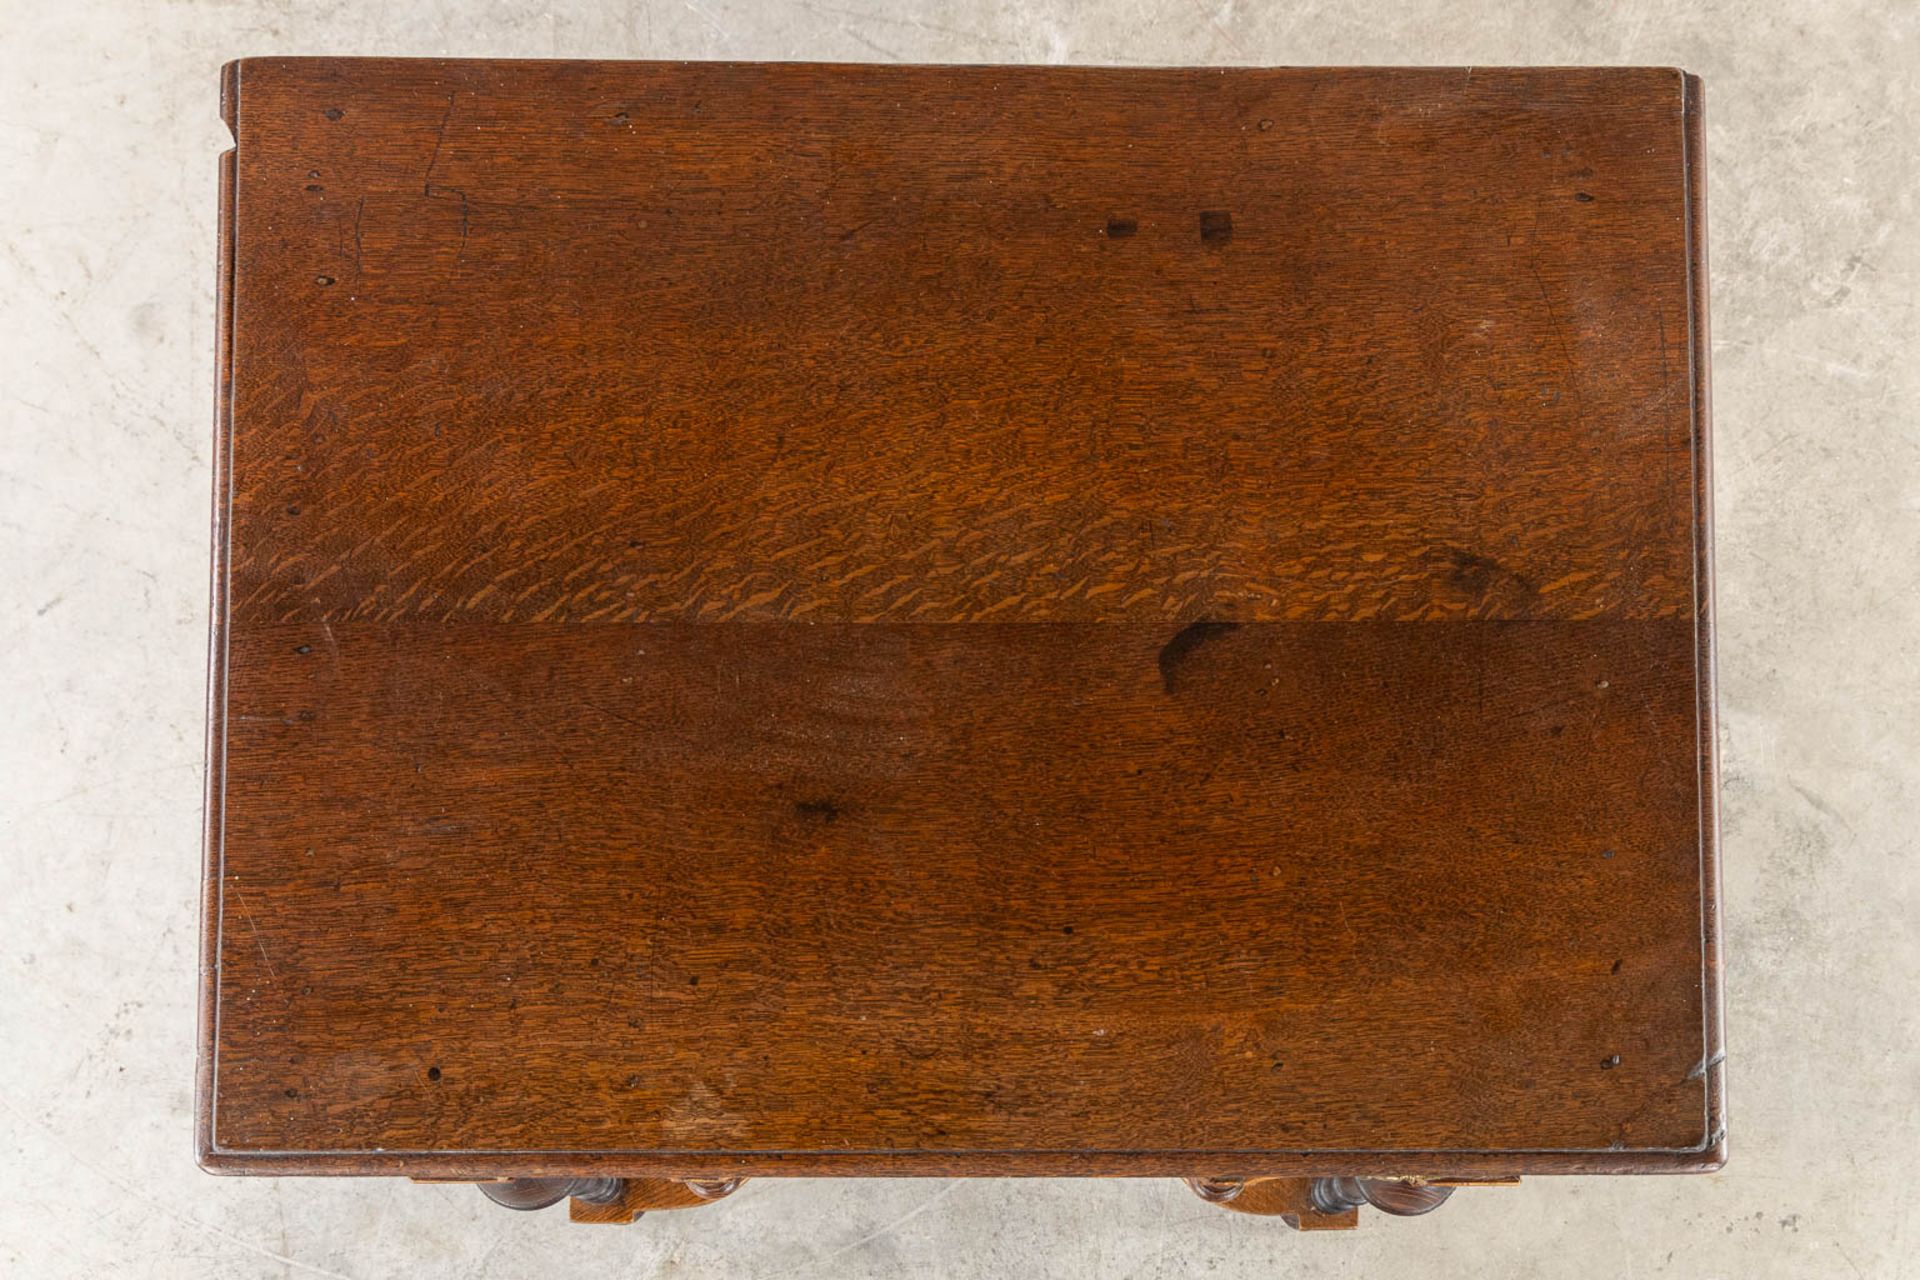 An antique oak 'Pay Table', The Netherlands, 18th C. (L:53 x W:69 x H:70 cm) - Image 9 of 11